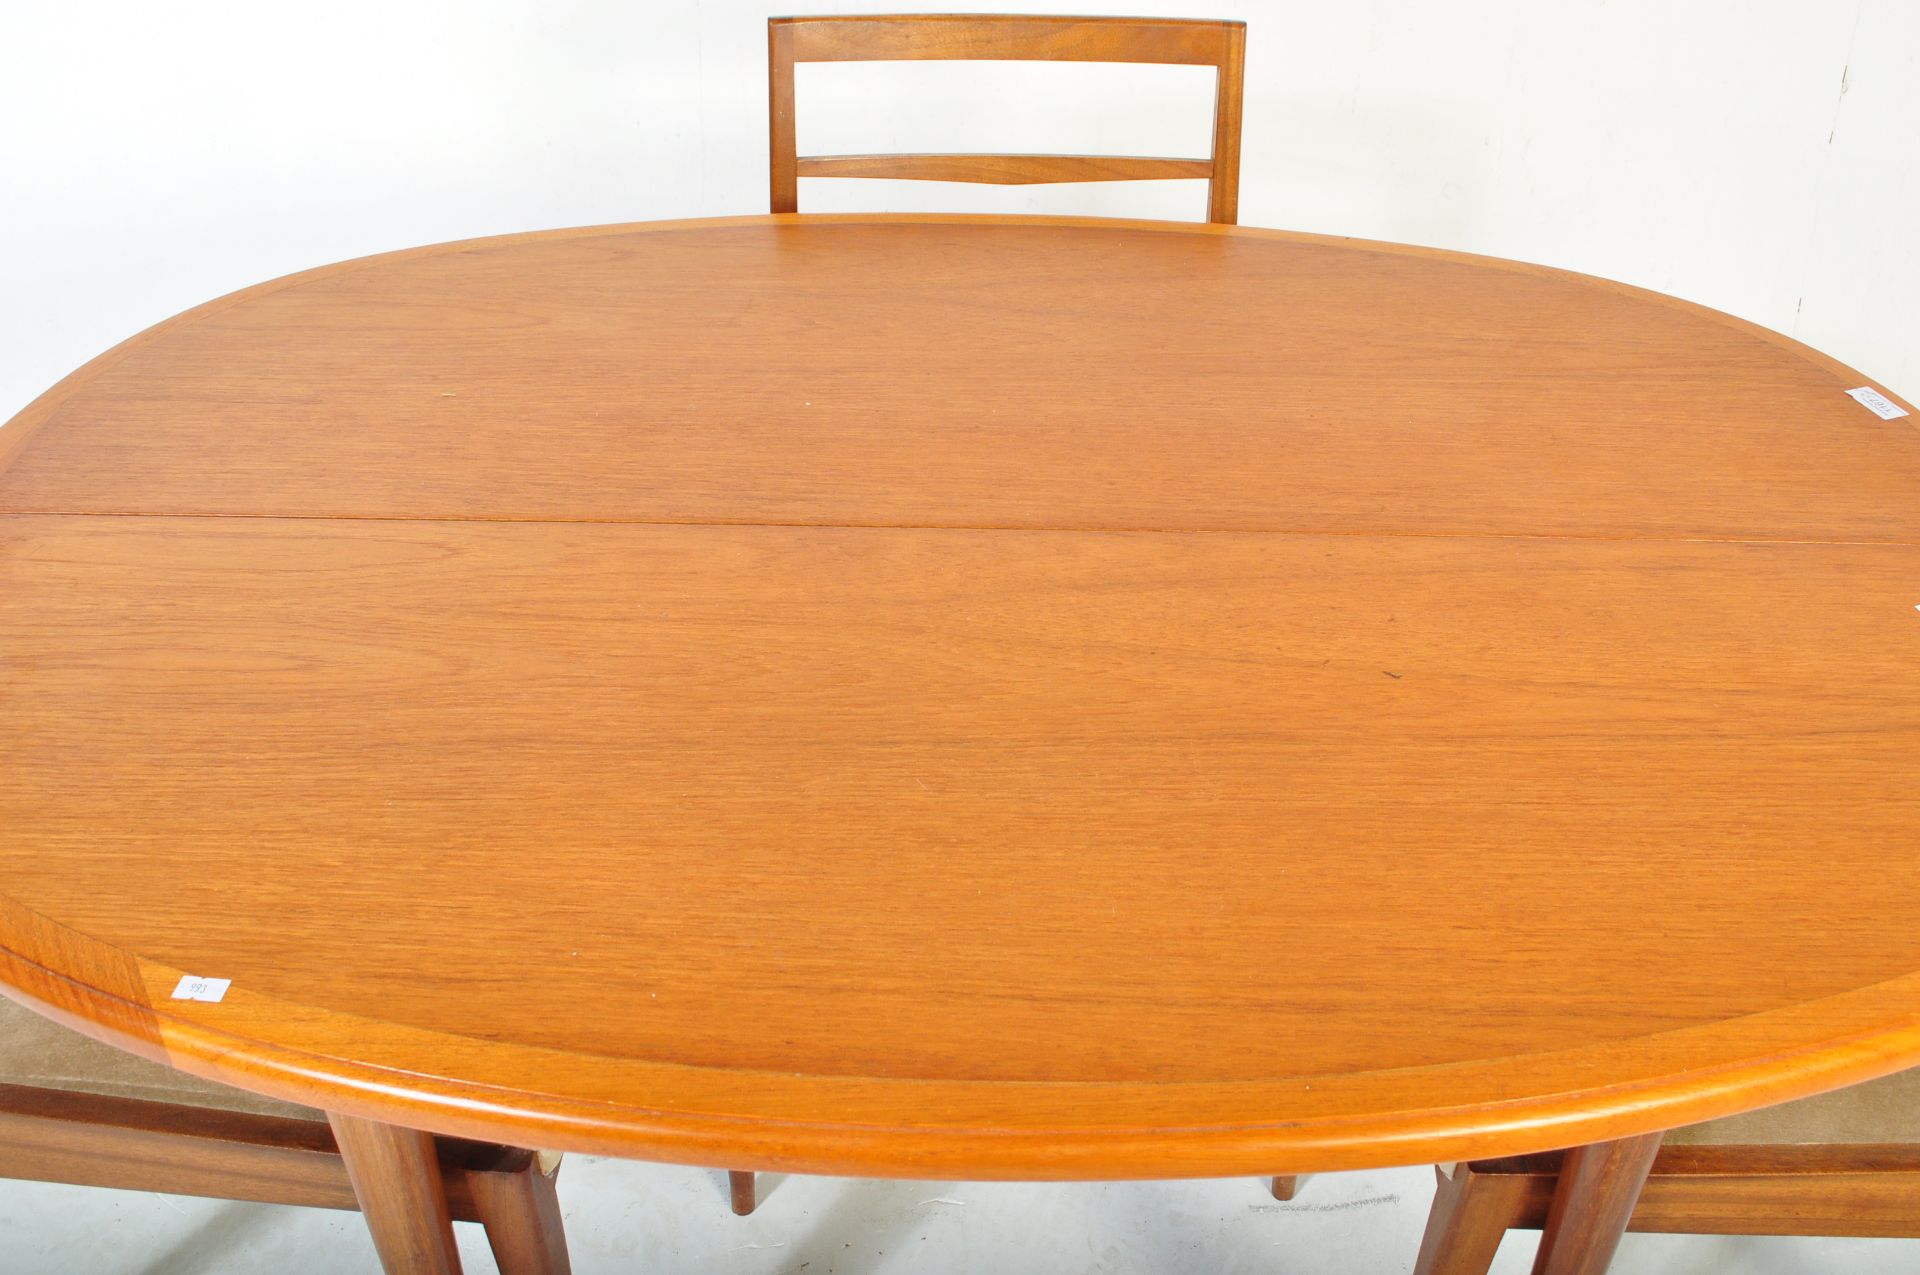 MID 20TH CENTURY TEAK DINING TABLE & FOUR CHAIRS - Image 3 of 5